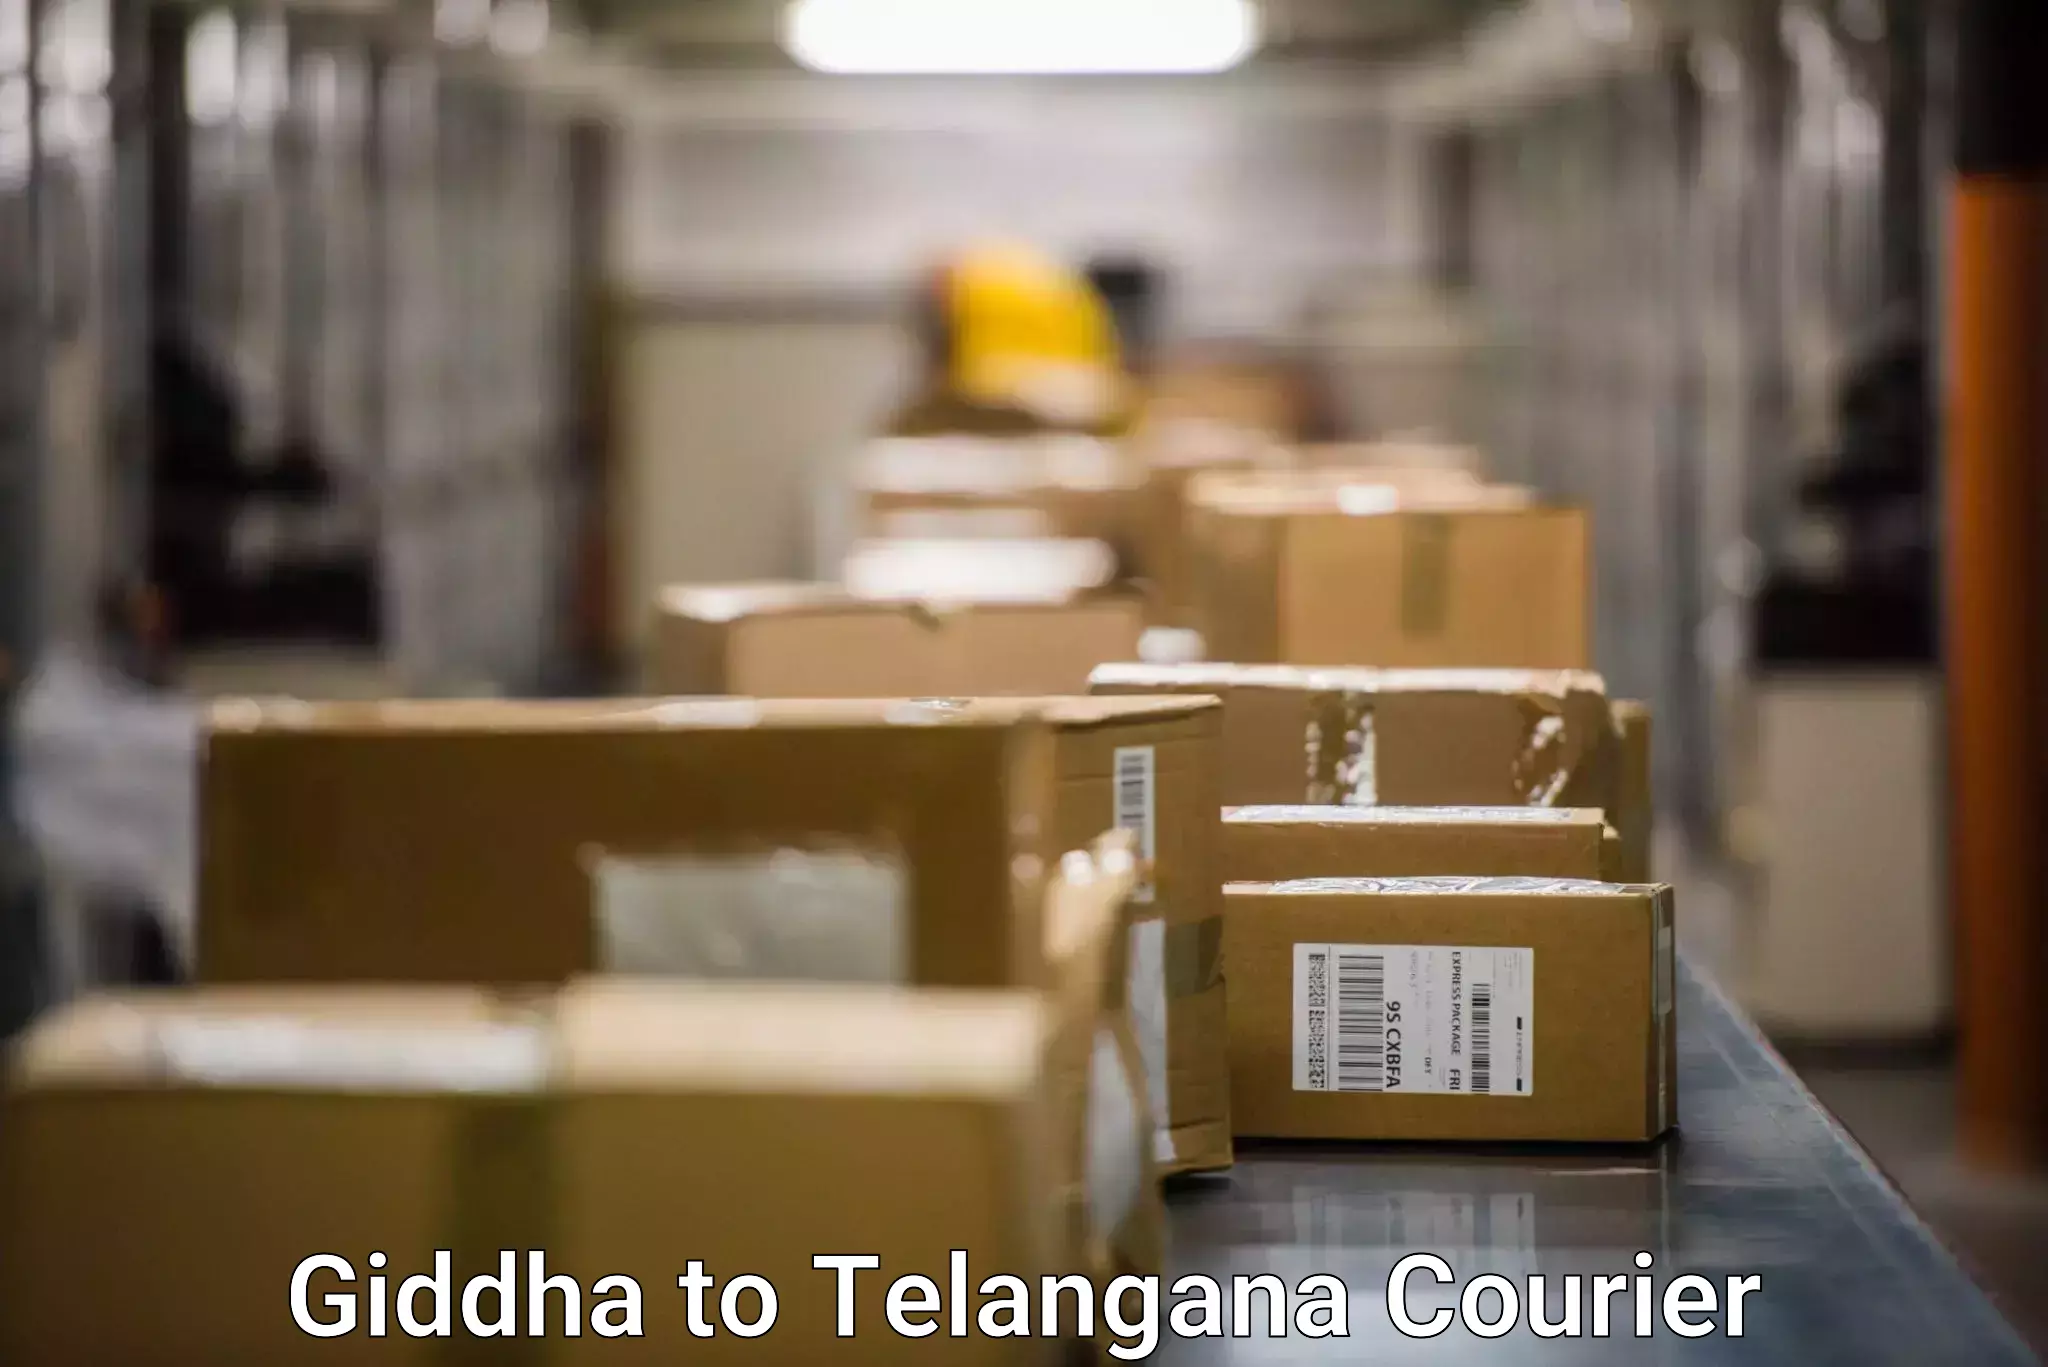 Efficient logistics management in Giddha to Asifabad